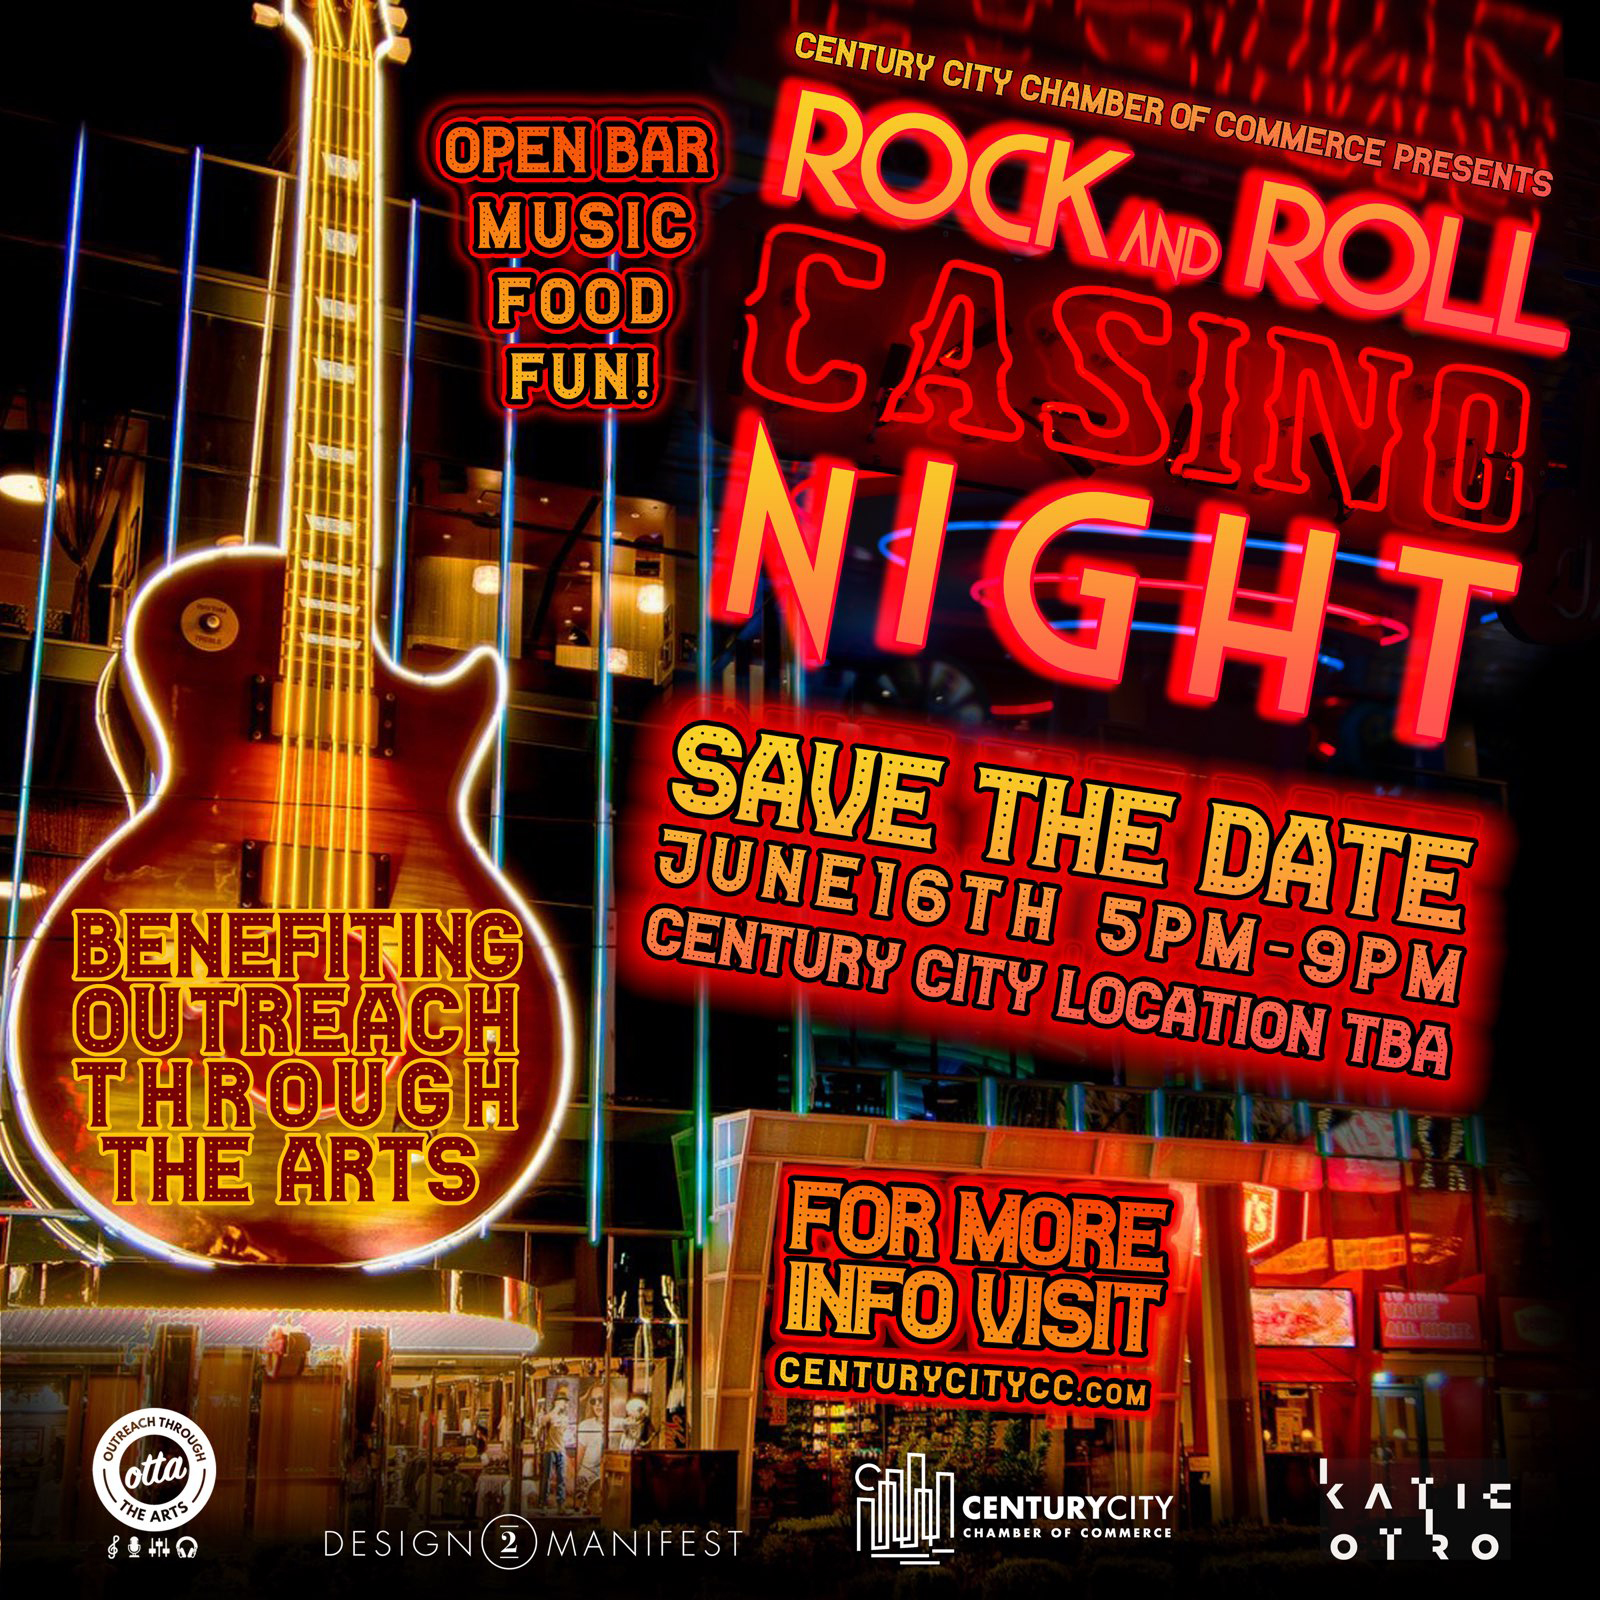 century city, los angeles, events, charity, casino night, music, youth, kids, children, charity event los angeles, chamber of commerce, outreach through the arts, music education, scholarships